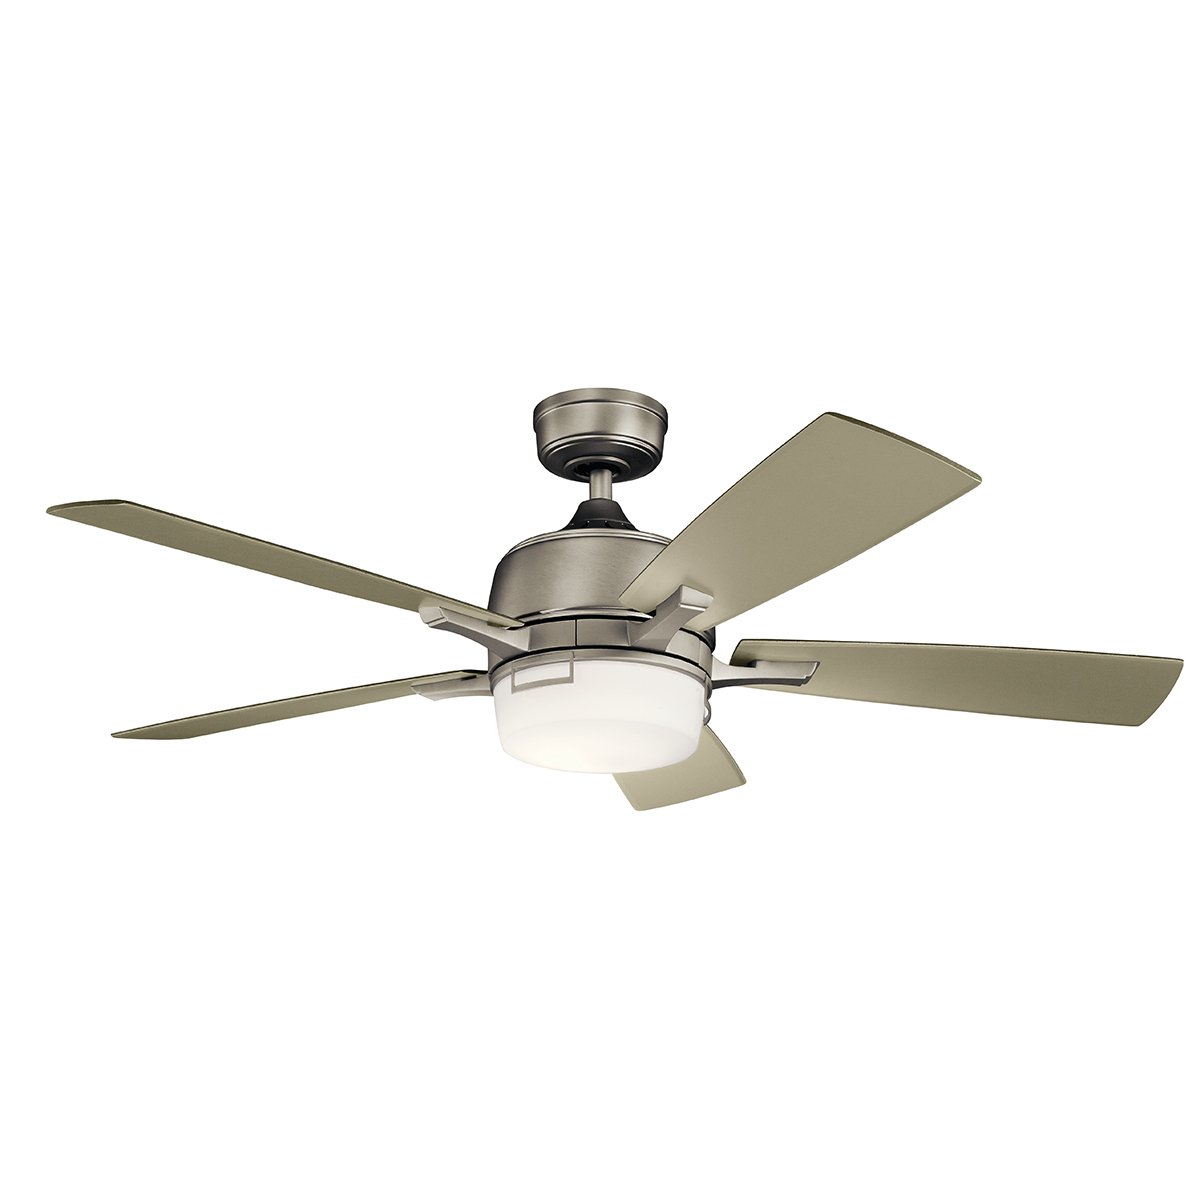 Constructed from steel, this 5 blade 52 inch Leeds(TM) LED ceiling fan pairs traditional form with updated detailing to create a unique composition. Showcased with a Brushed Nickel finish this design will deliver an elegant touch to any space.